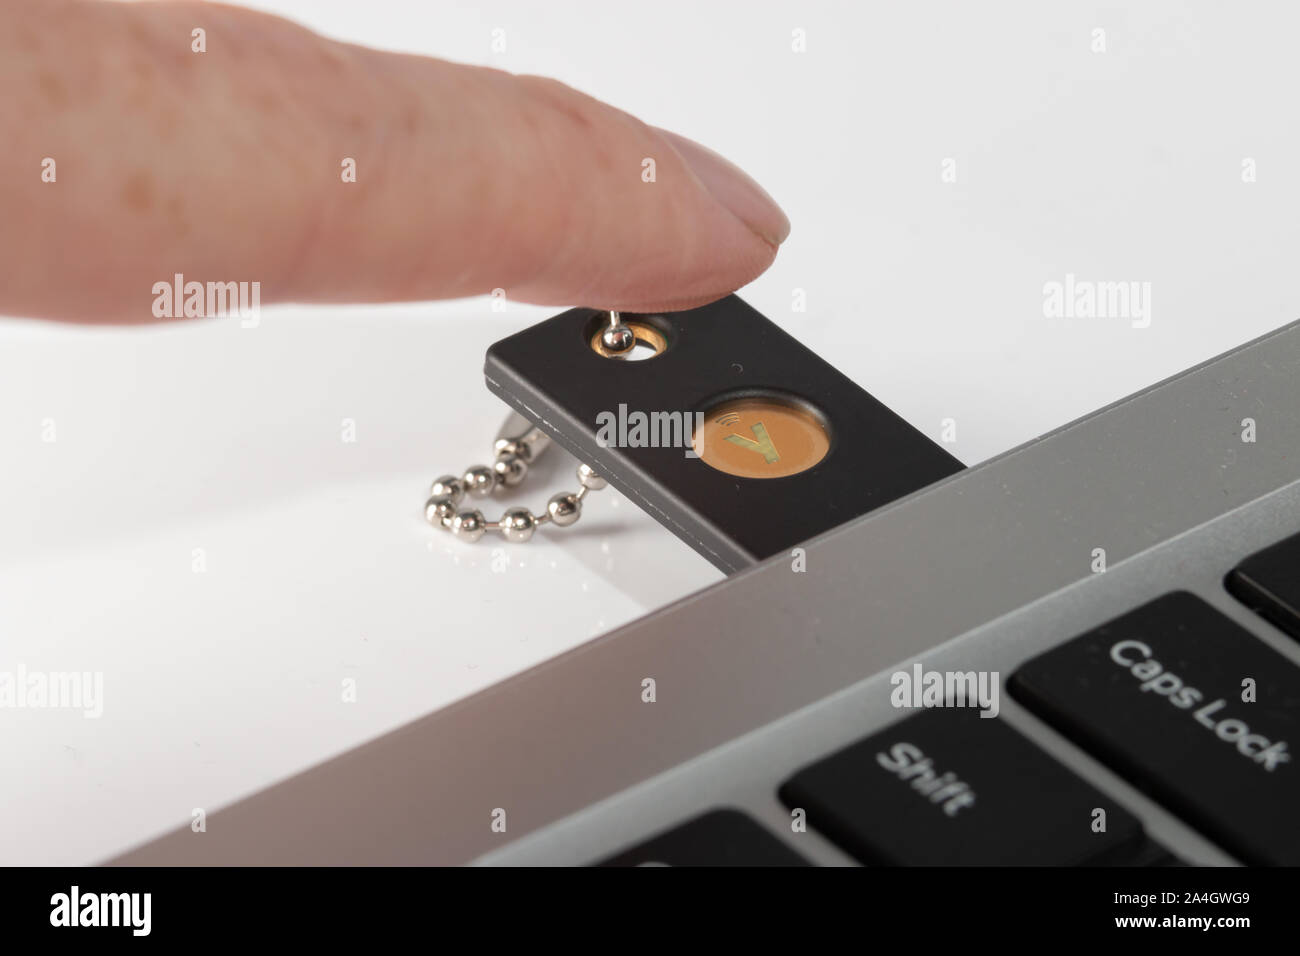 A Yubikey 5 hardware security key being used on a laptop computer Stock Photo